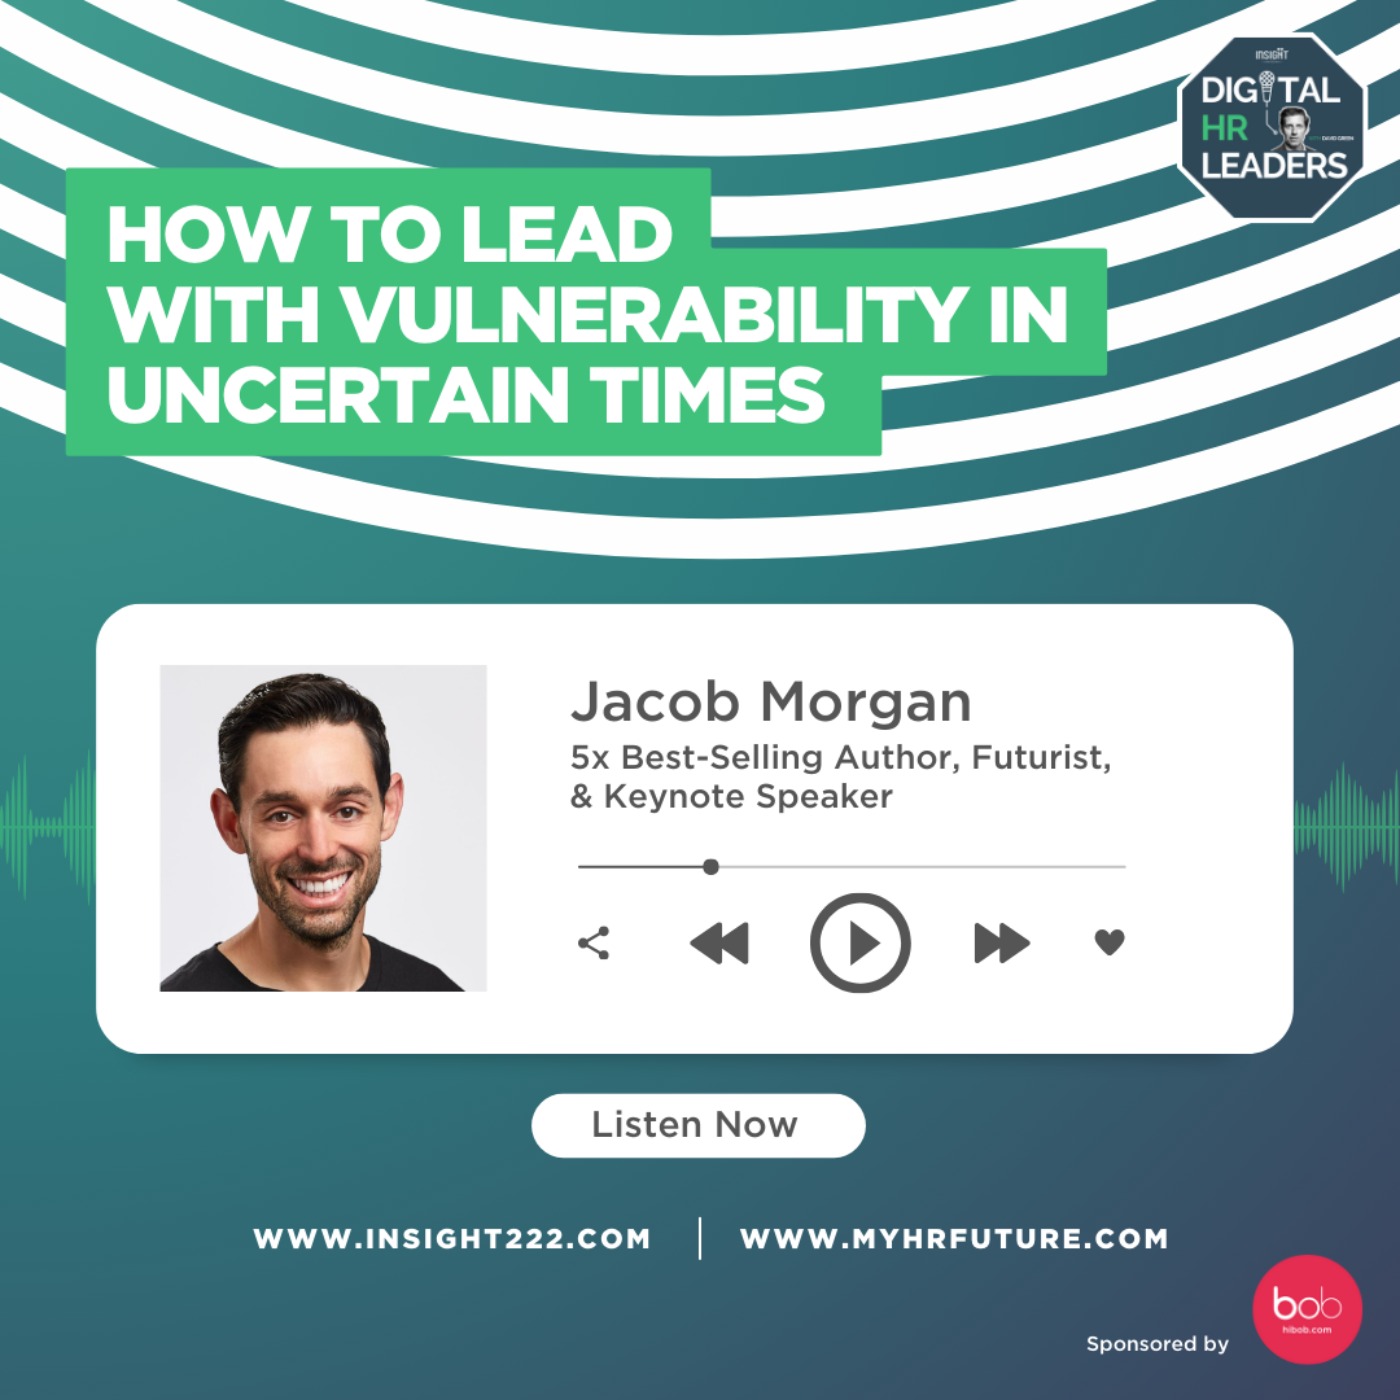 How to Lead with Vulnerability in Uncertain Times (an Interview with Jacob Morgan)